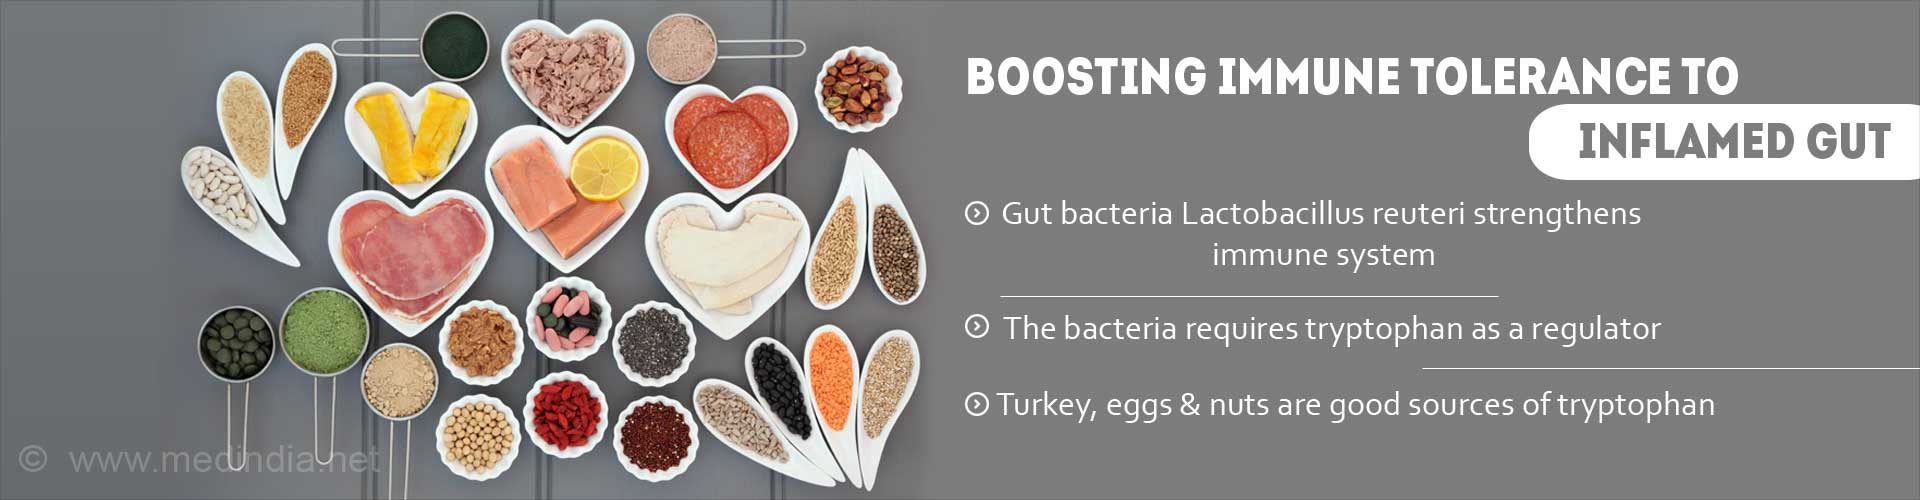 boosting immune tolerance to inflamed gut
- gut bacteria lactobacillus reuteri strengthens immune system
- the bacteria requires tryptophan as a regulator
- turkey, eggs & nuts are good sources of tryptophan